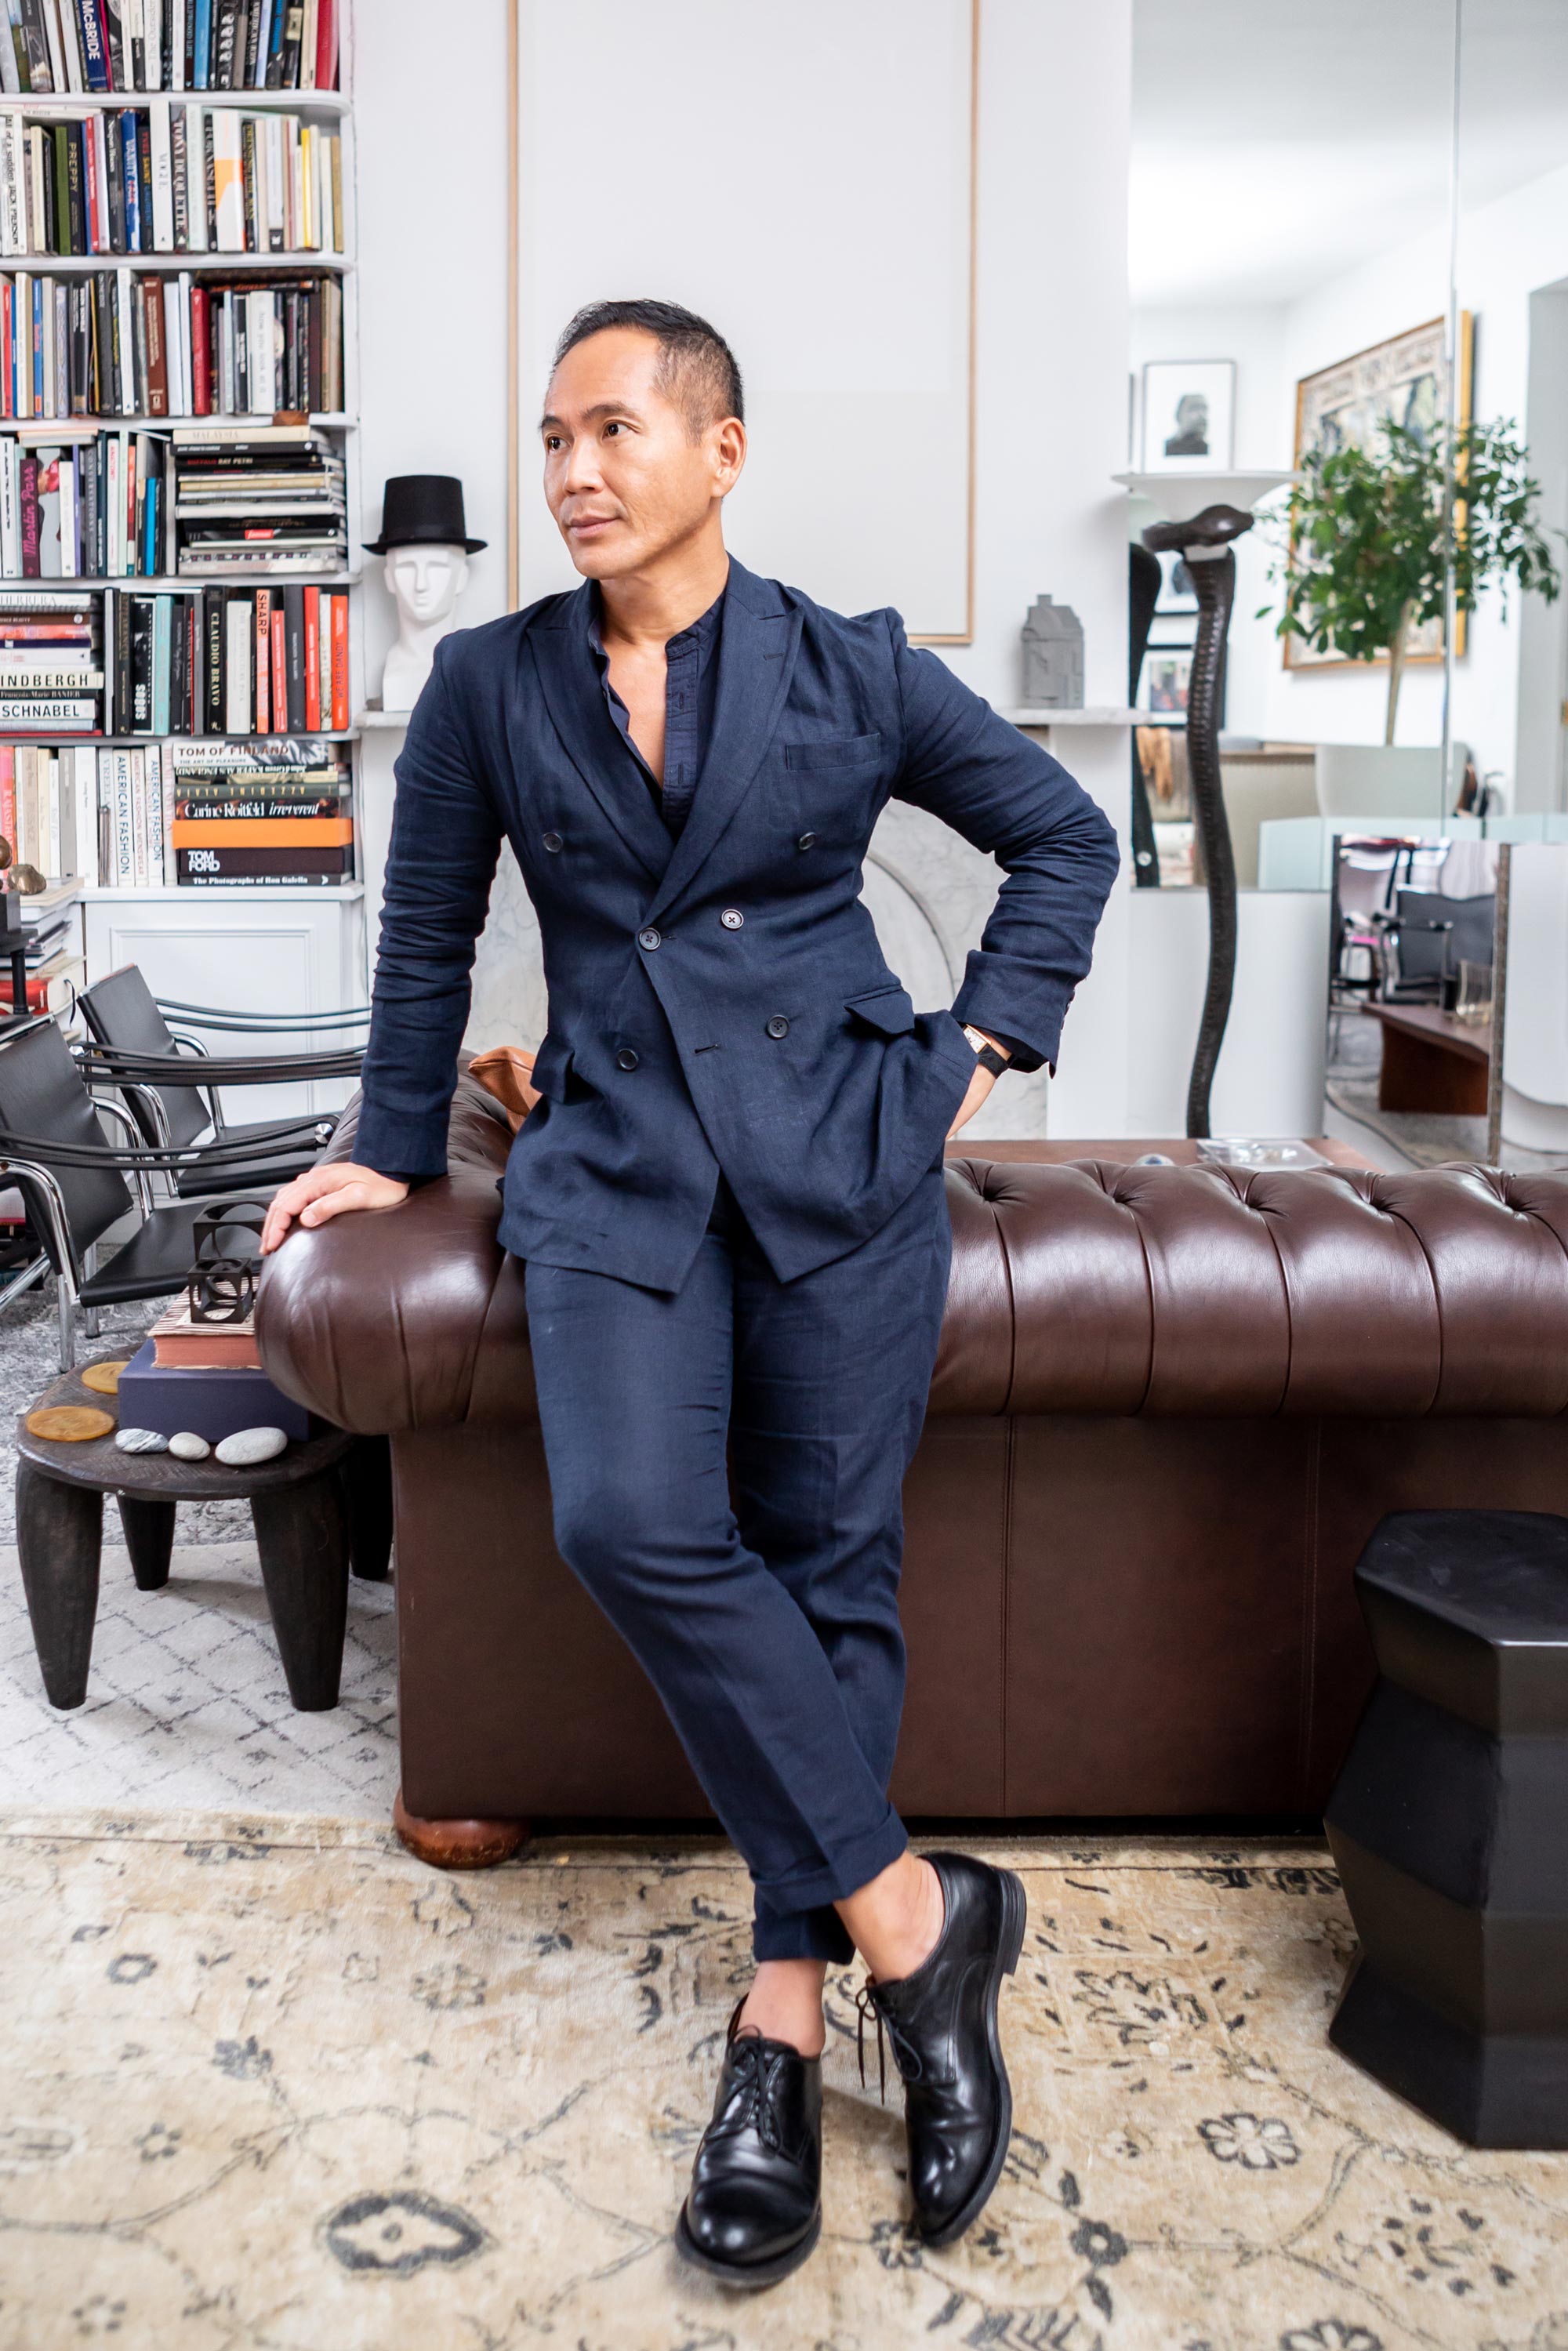 Marcus Teo in his little museum of an apartment.